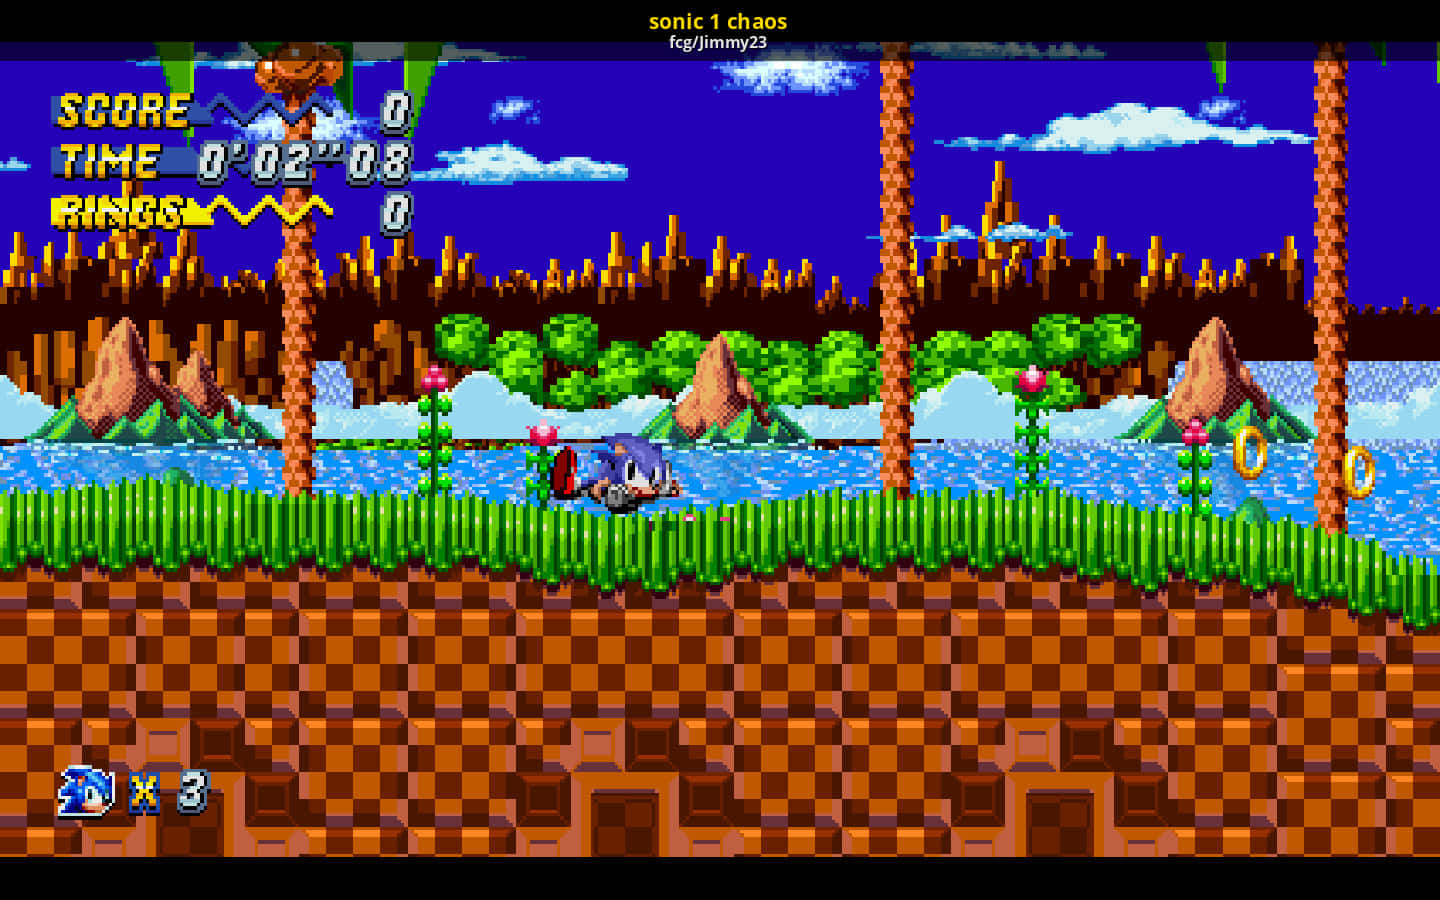 Sonic Chaos - High-speed action with Sonic and Tails Wallpaper